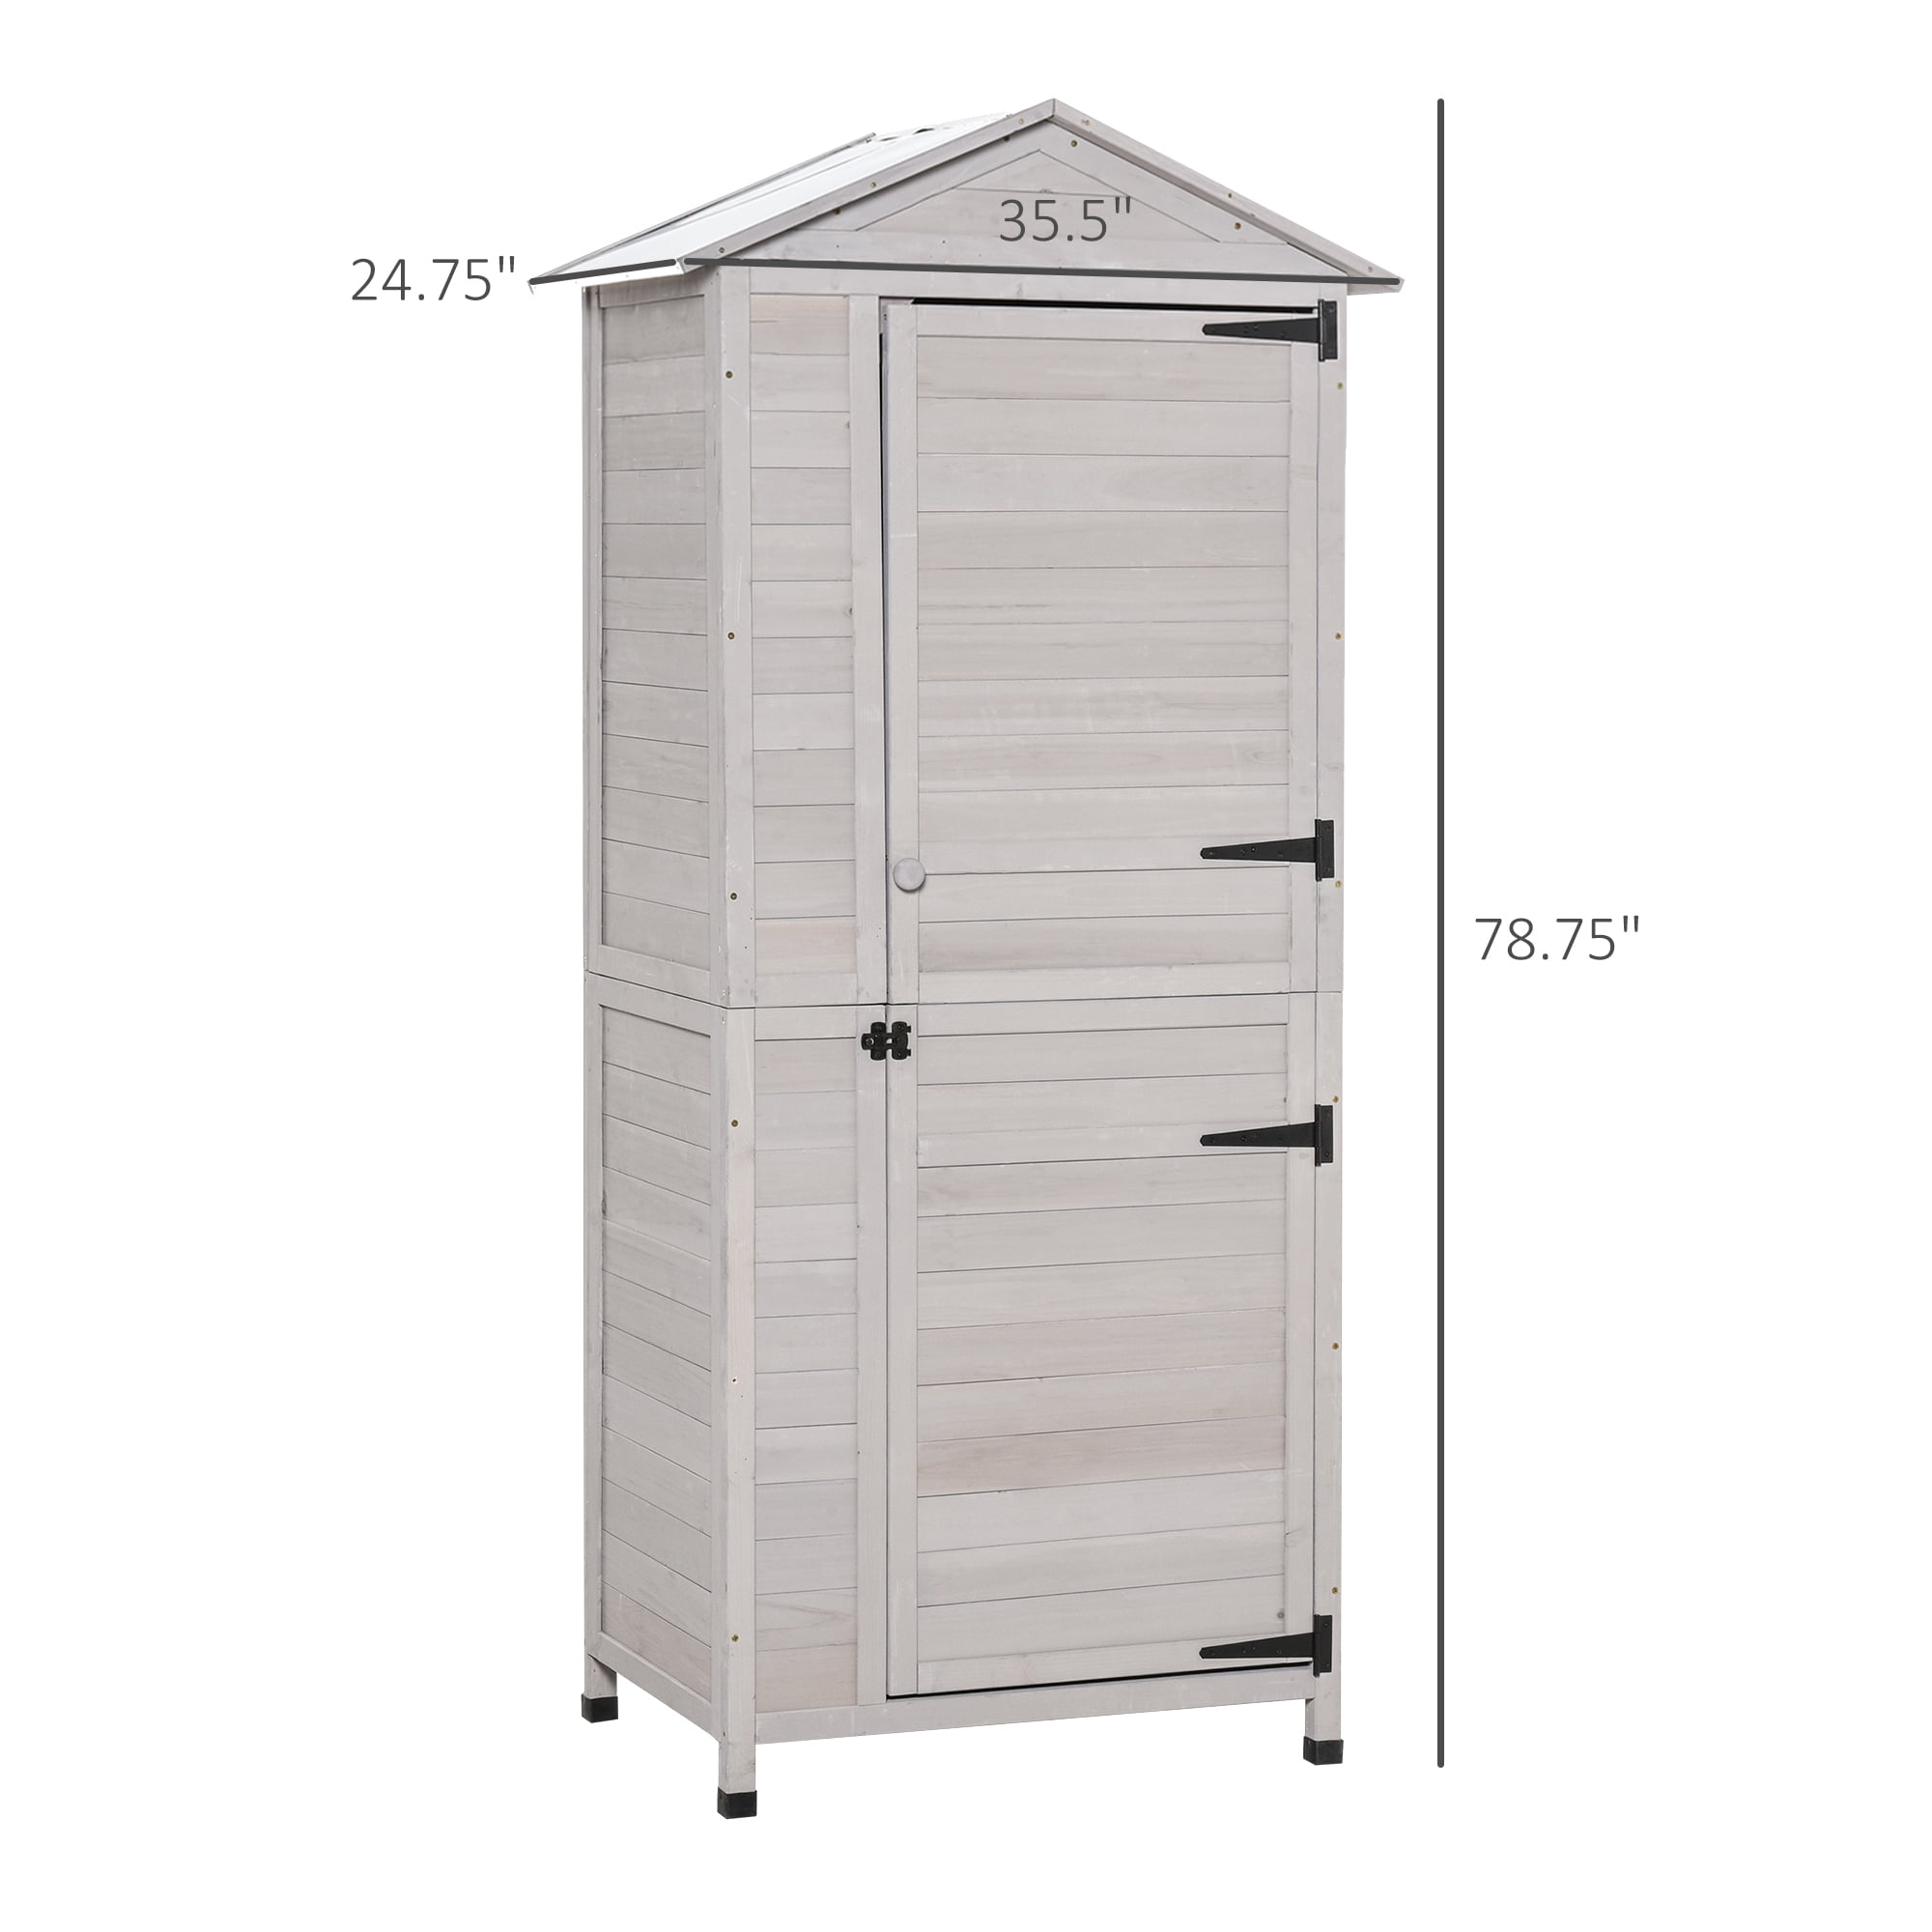 Tall Garden Shed Wooden Narrow Cabinet Tool Storage Box Slim Cupboard Shelter 